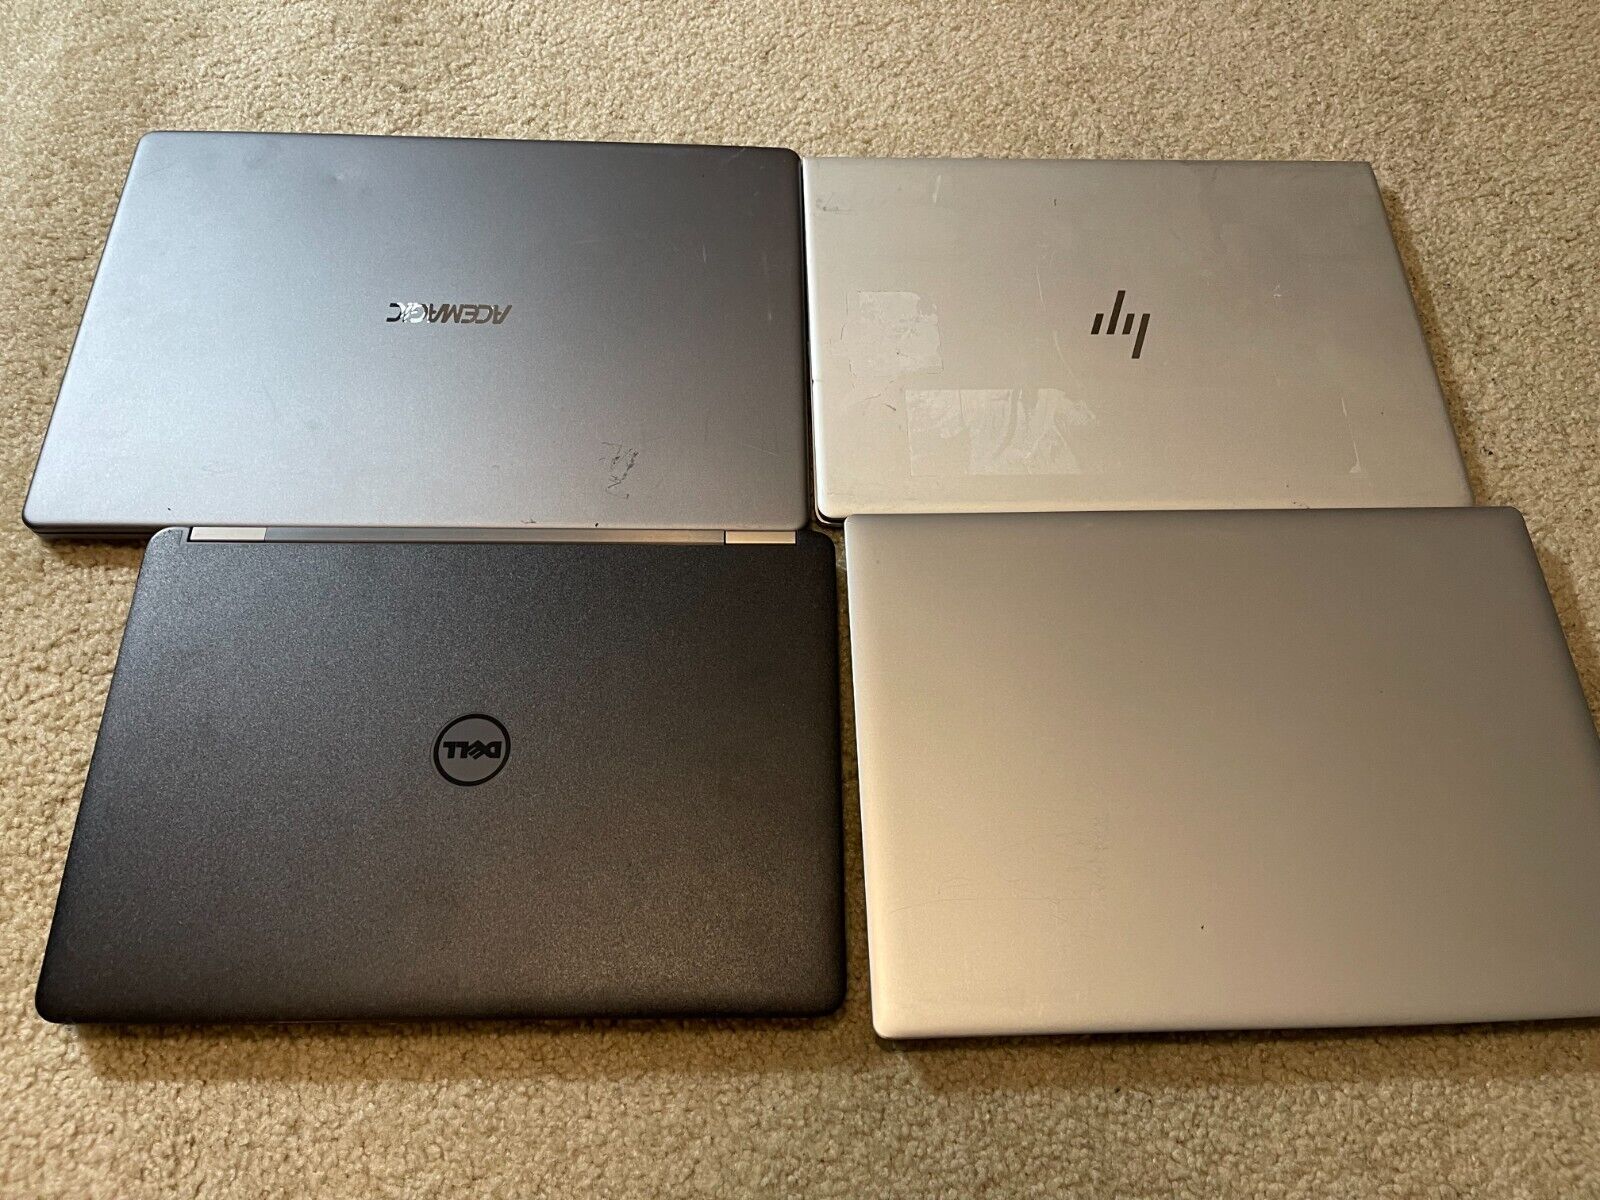 Lot of 4 laptops - 1x Dell, 1x HP, 1x Misc, 1x Lenovo, Untested As Is